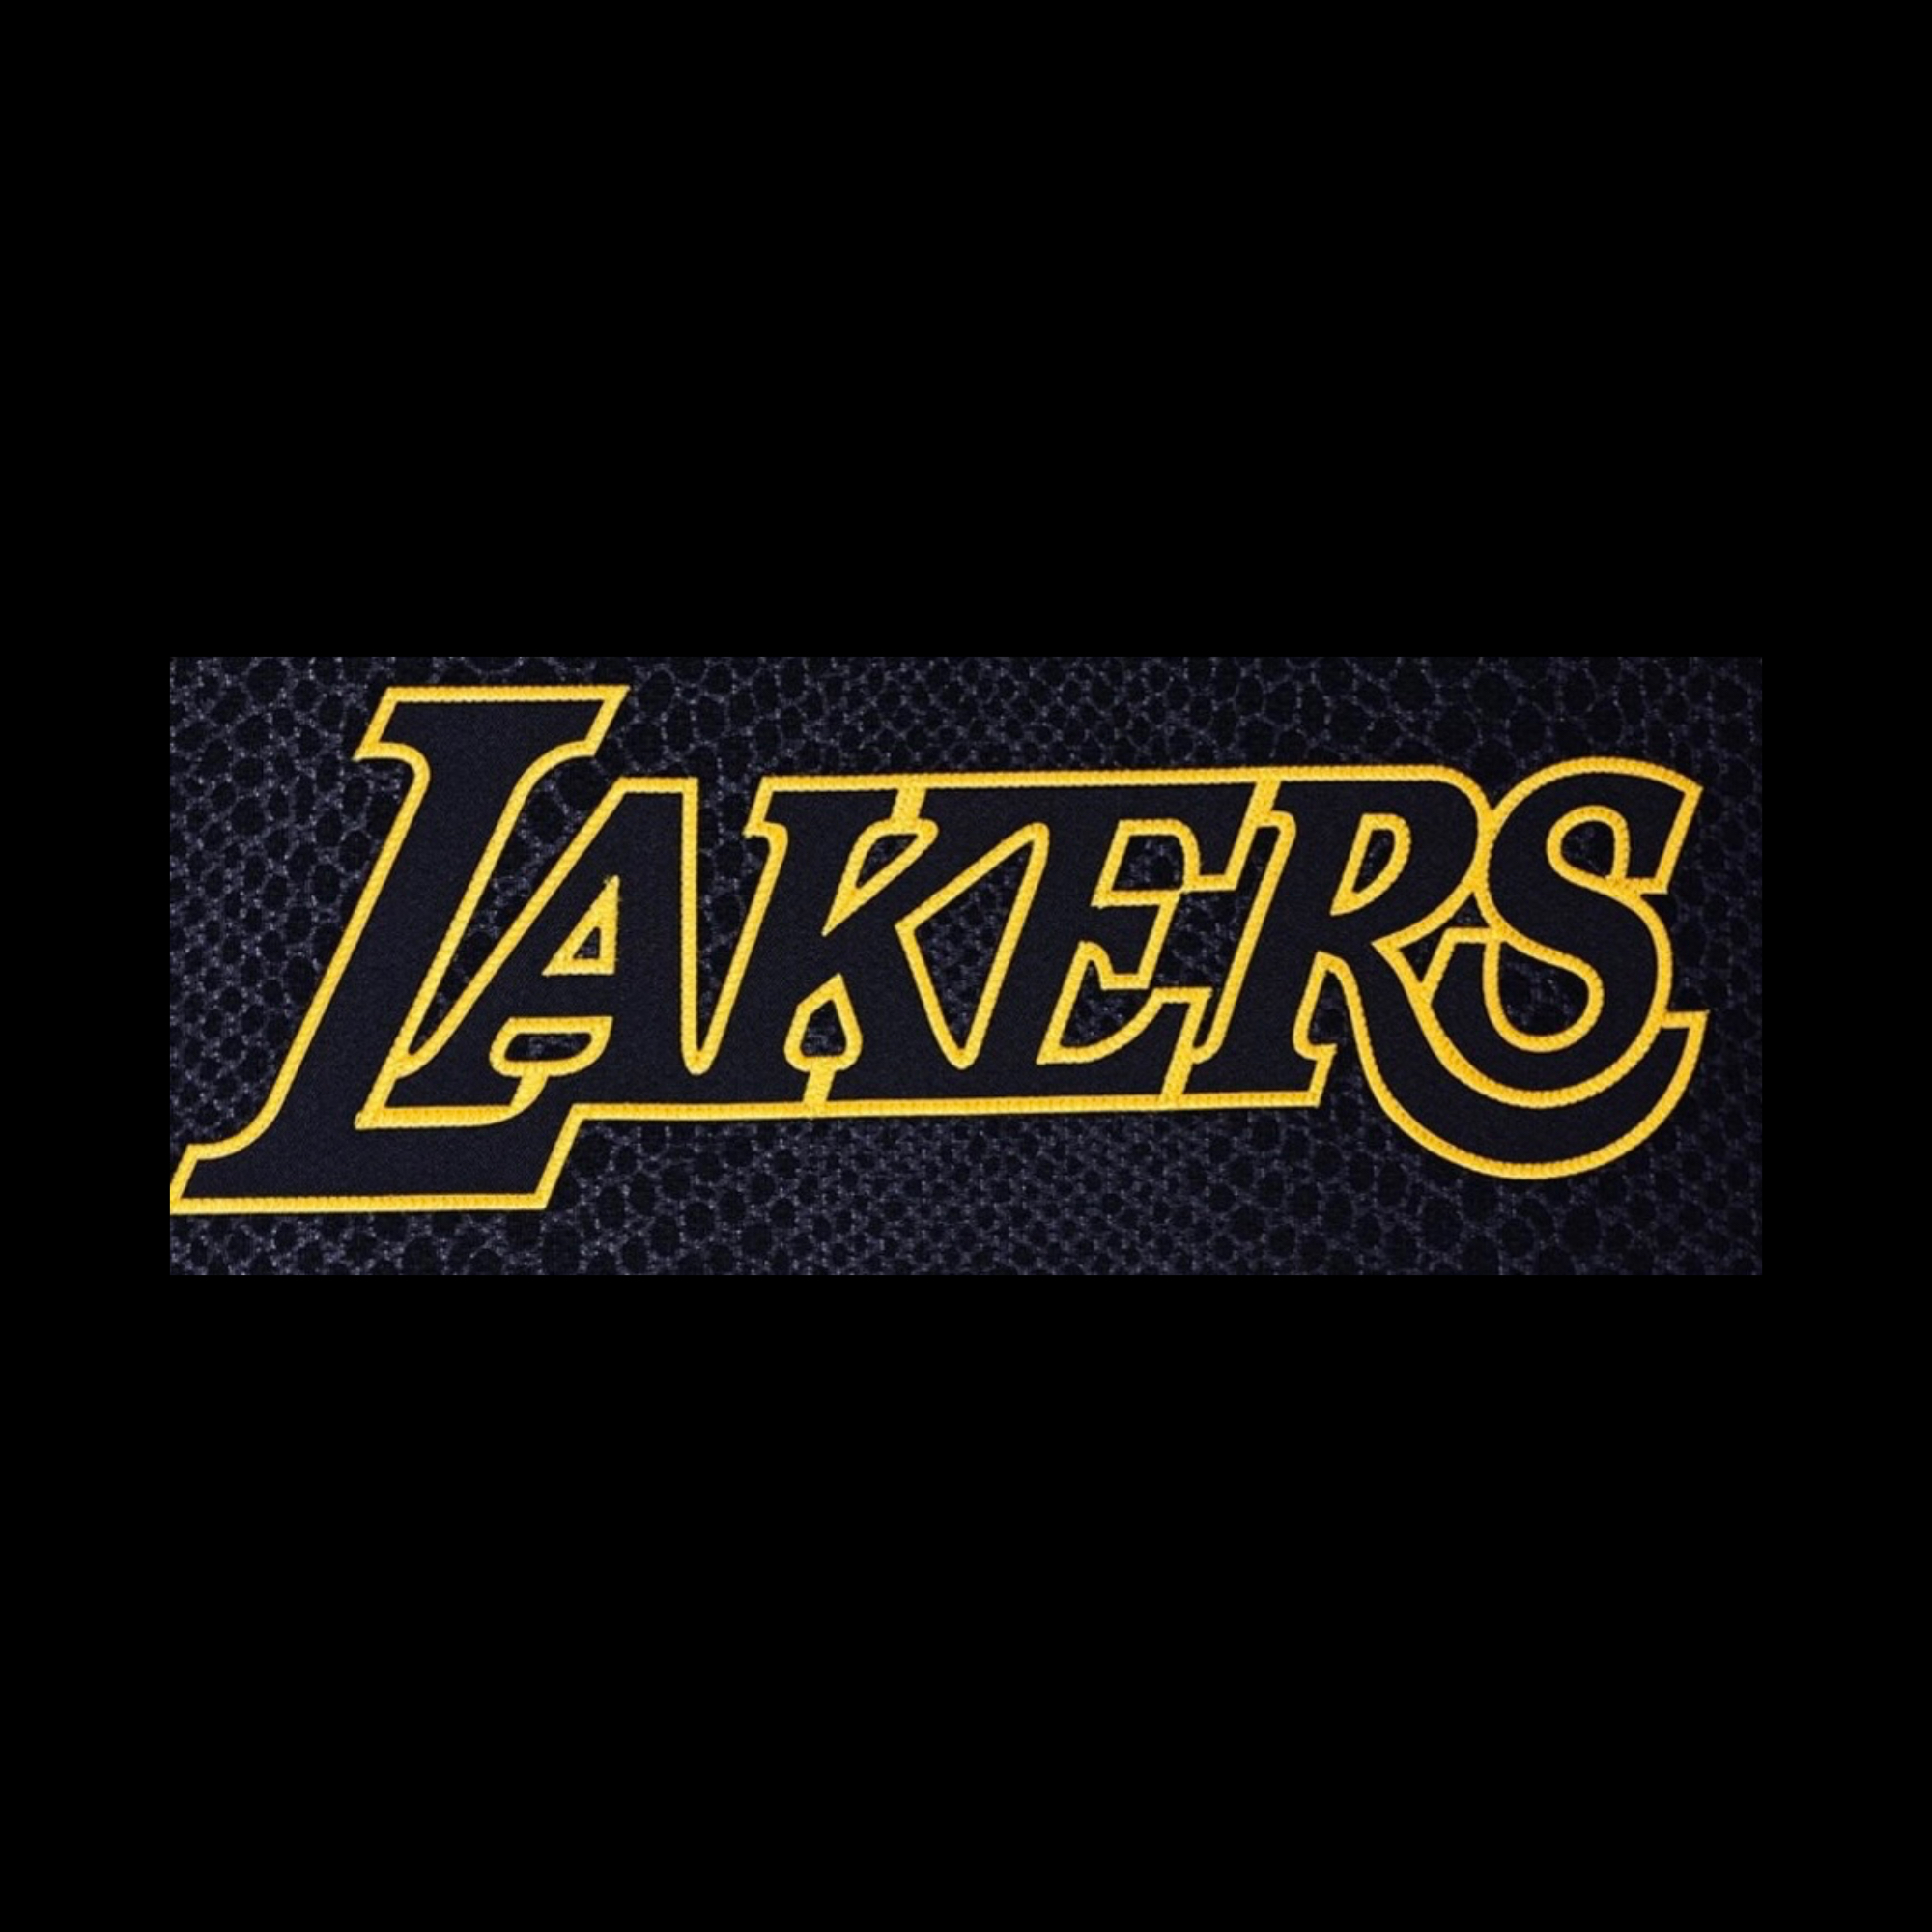 The official logo of Bay Area Lakers